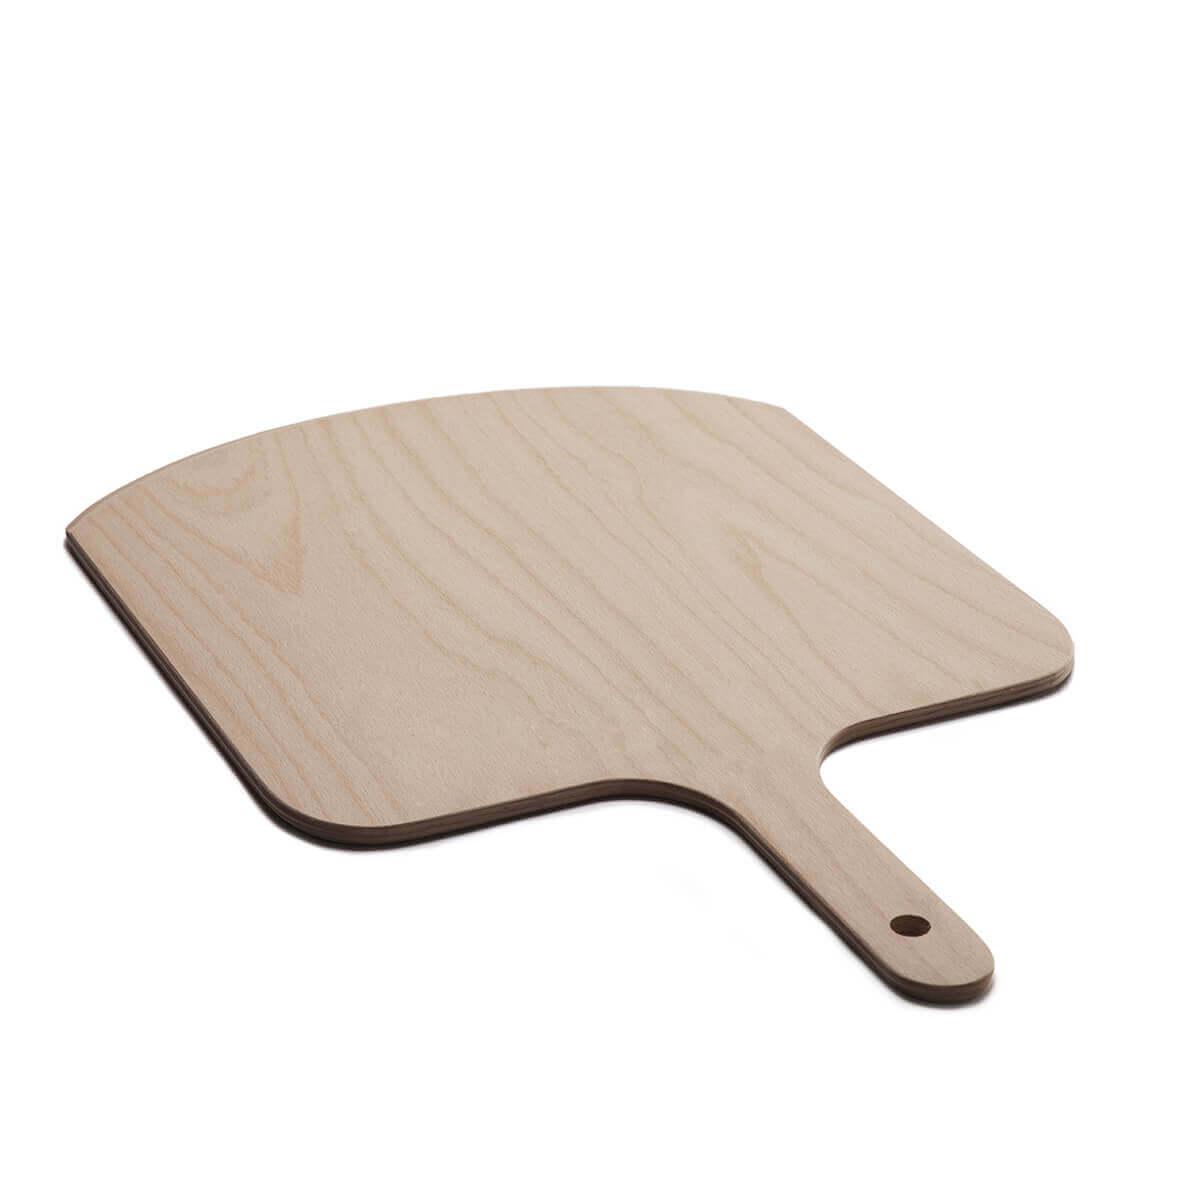 wooden paddle